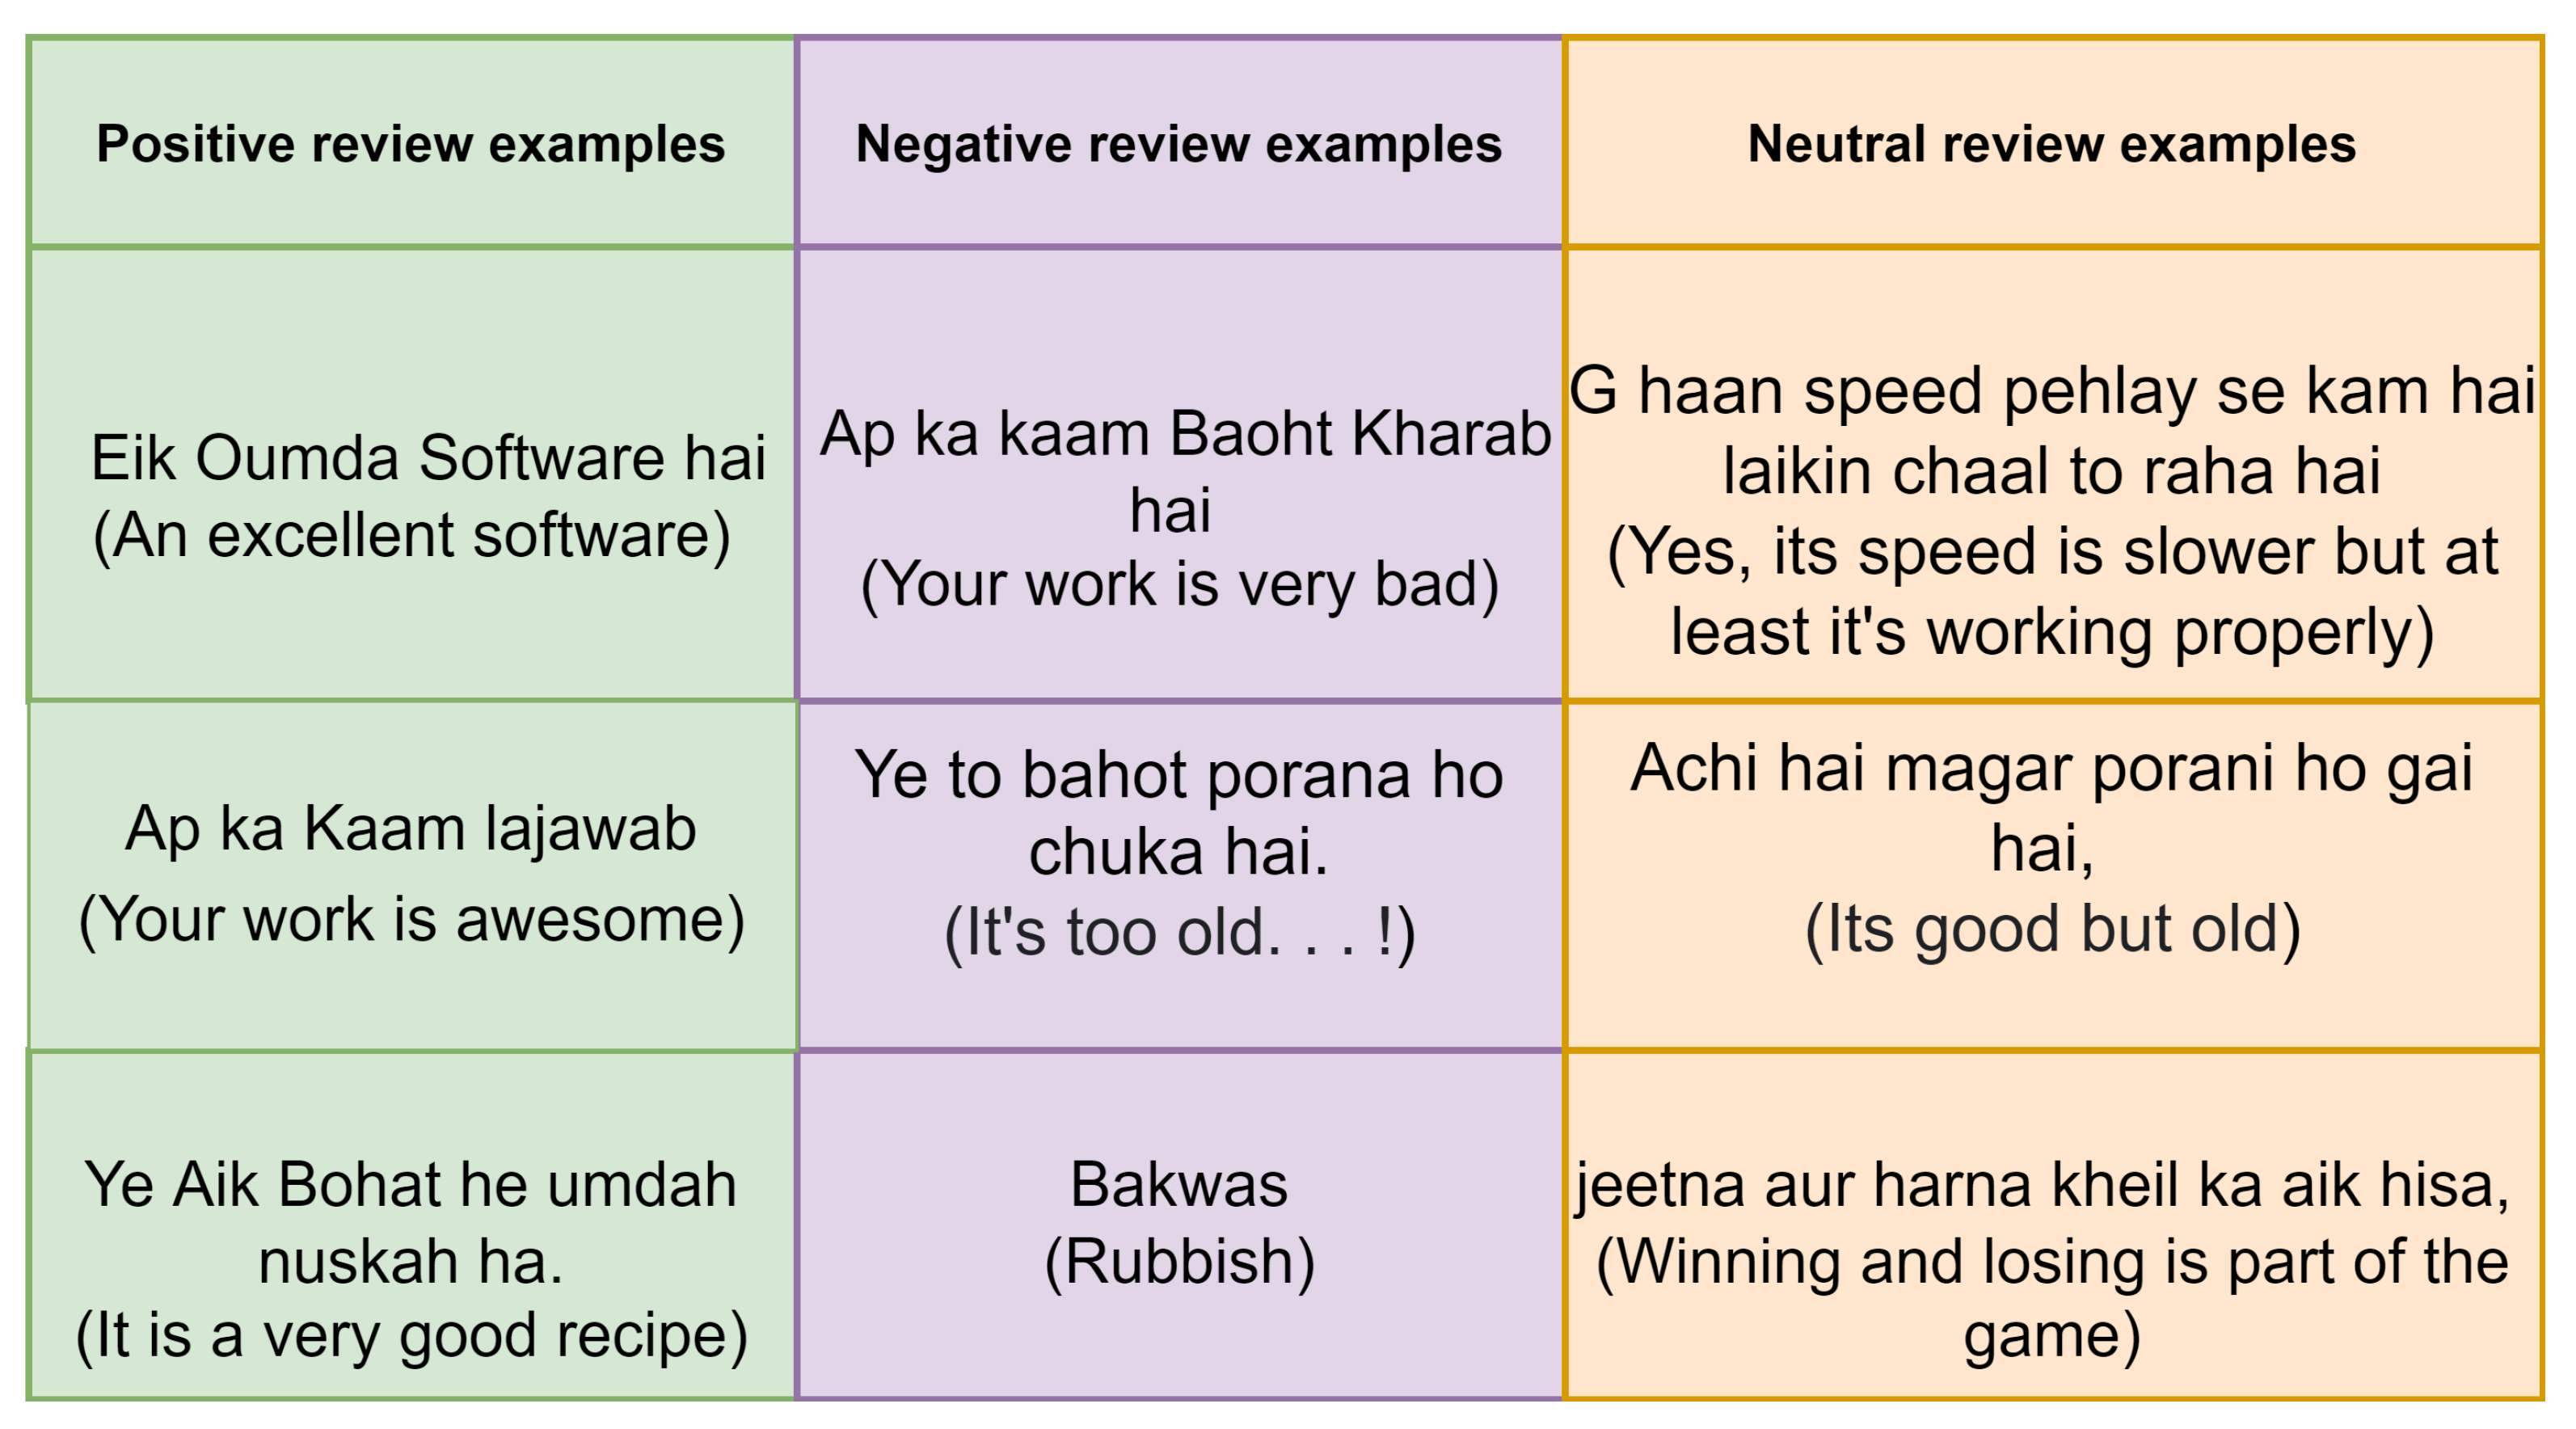 Social Media Vocabulary with Urdu and Hindi Meanings